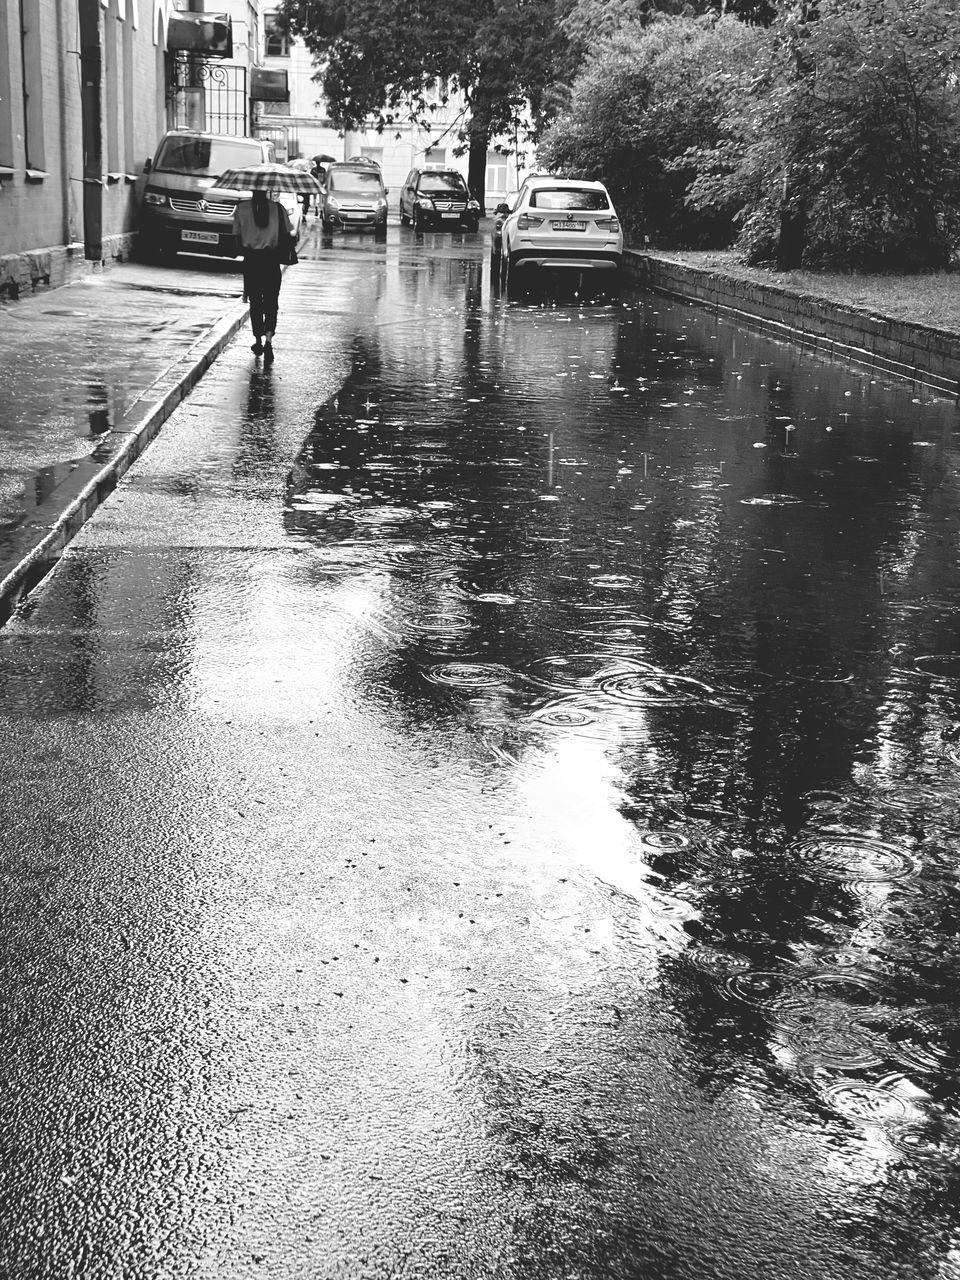 water, wet, rain, transportation, city, mode of transportation, nature, architecture, day, rainy season, reflection, black and white, street, monsoon, tree, building exterior, built structure, motor vehicle, monochrome, car, outdoors, land vehicle, men, plant, monochrome photography, road, one person, road surface, flood, vehicle, umbrella, torrential rain, puddle, lifestyles, waterway